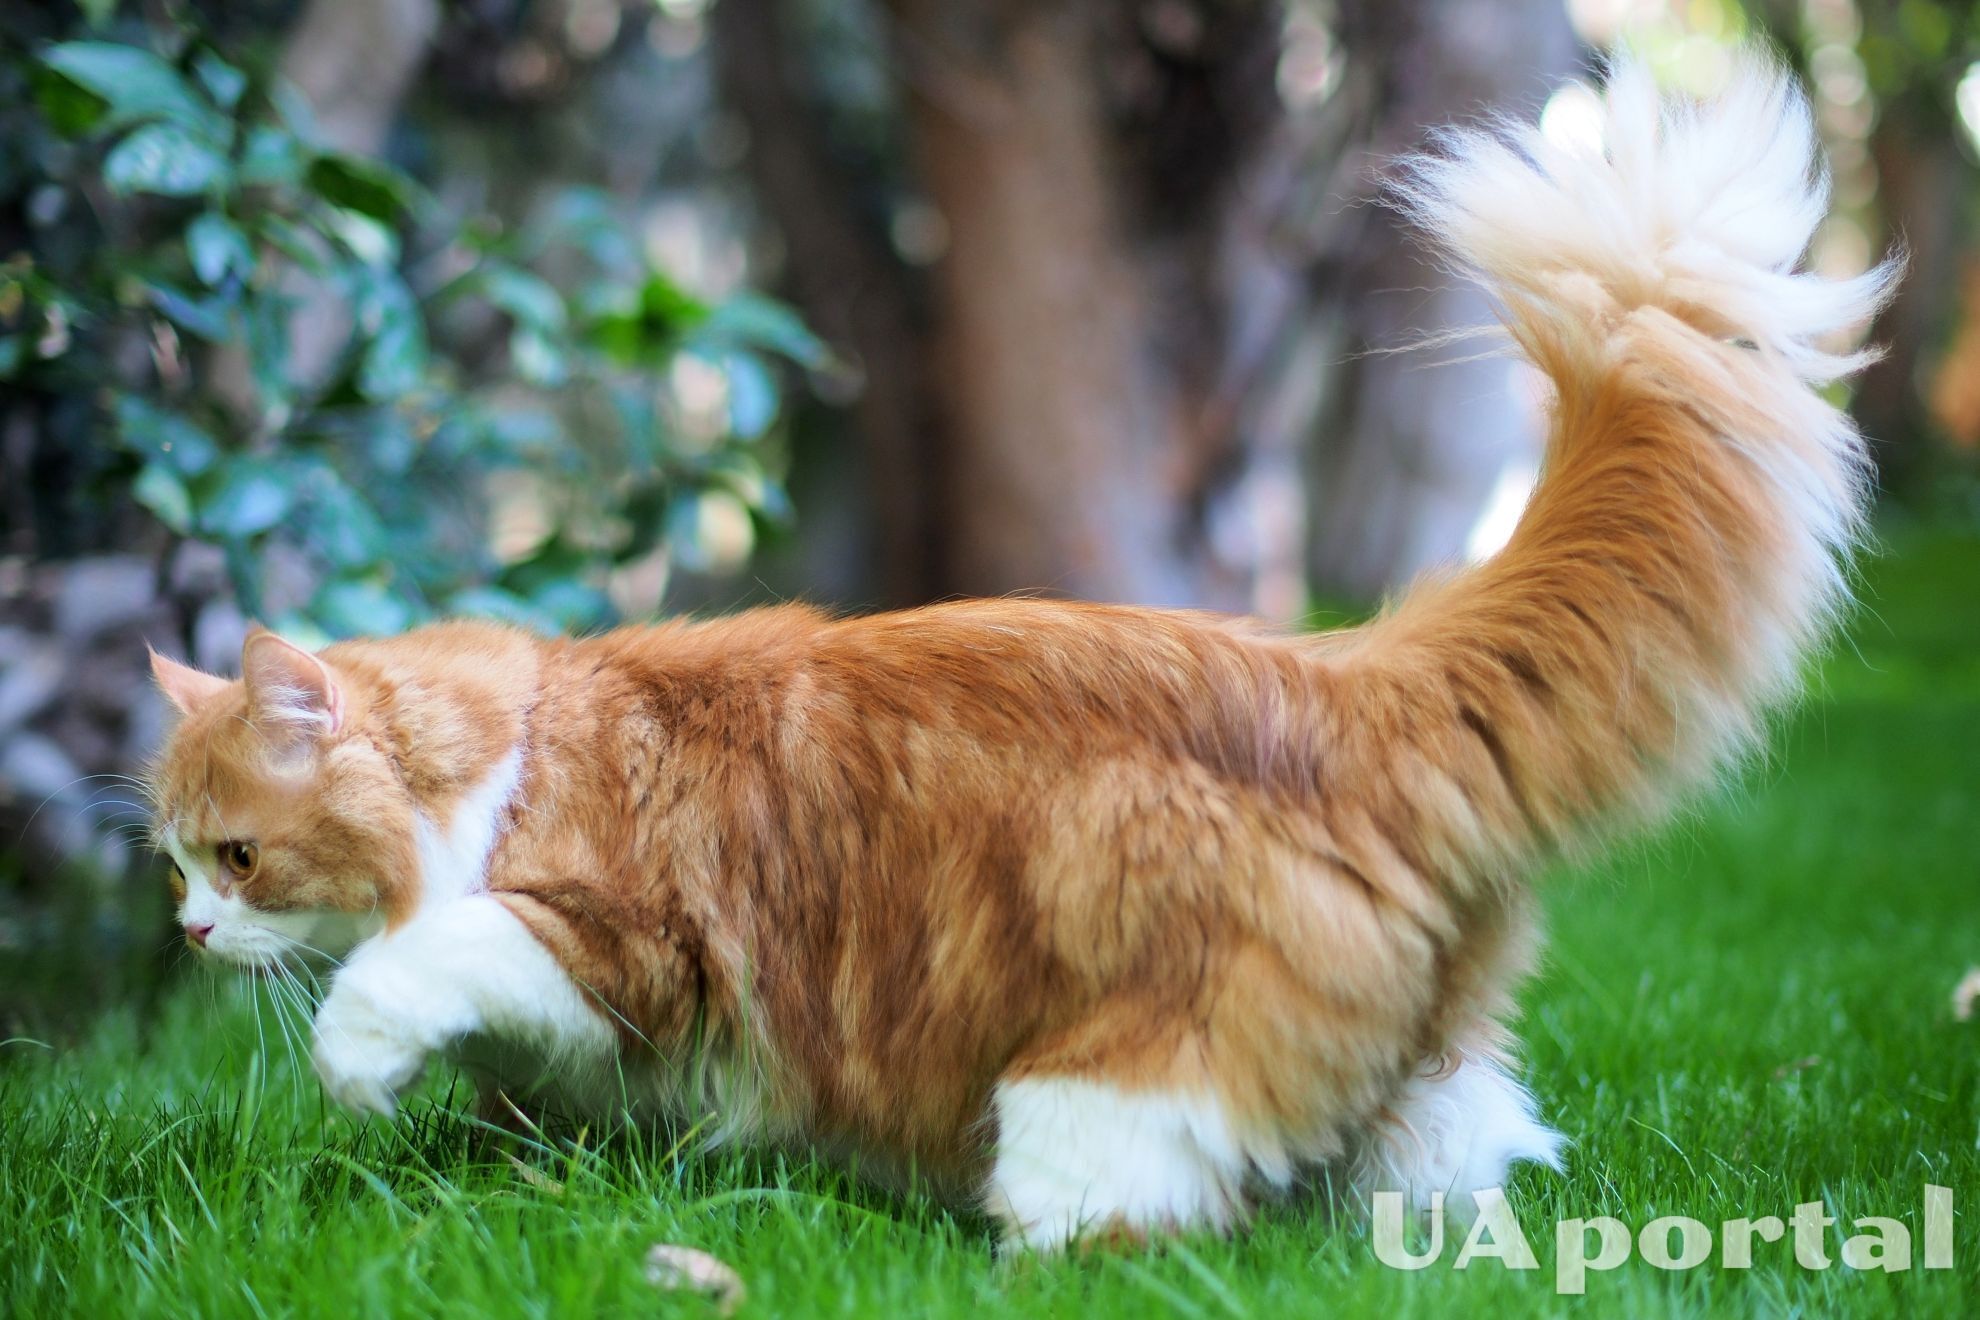 Is your cat over 10 years old? How to care for an aging cat